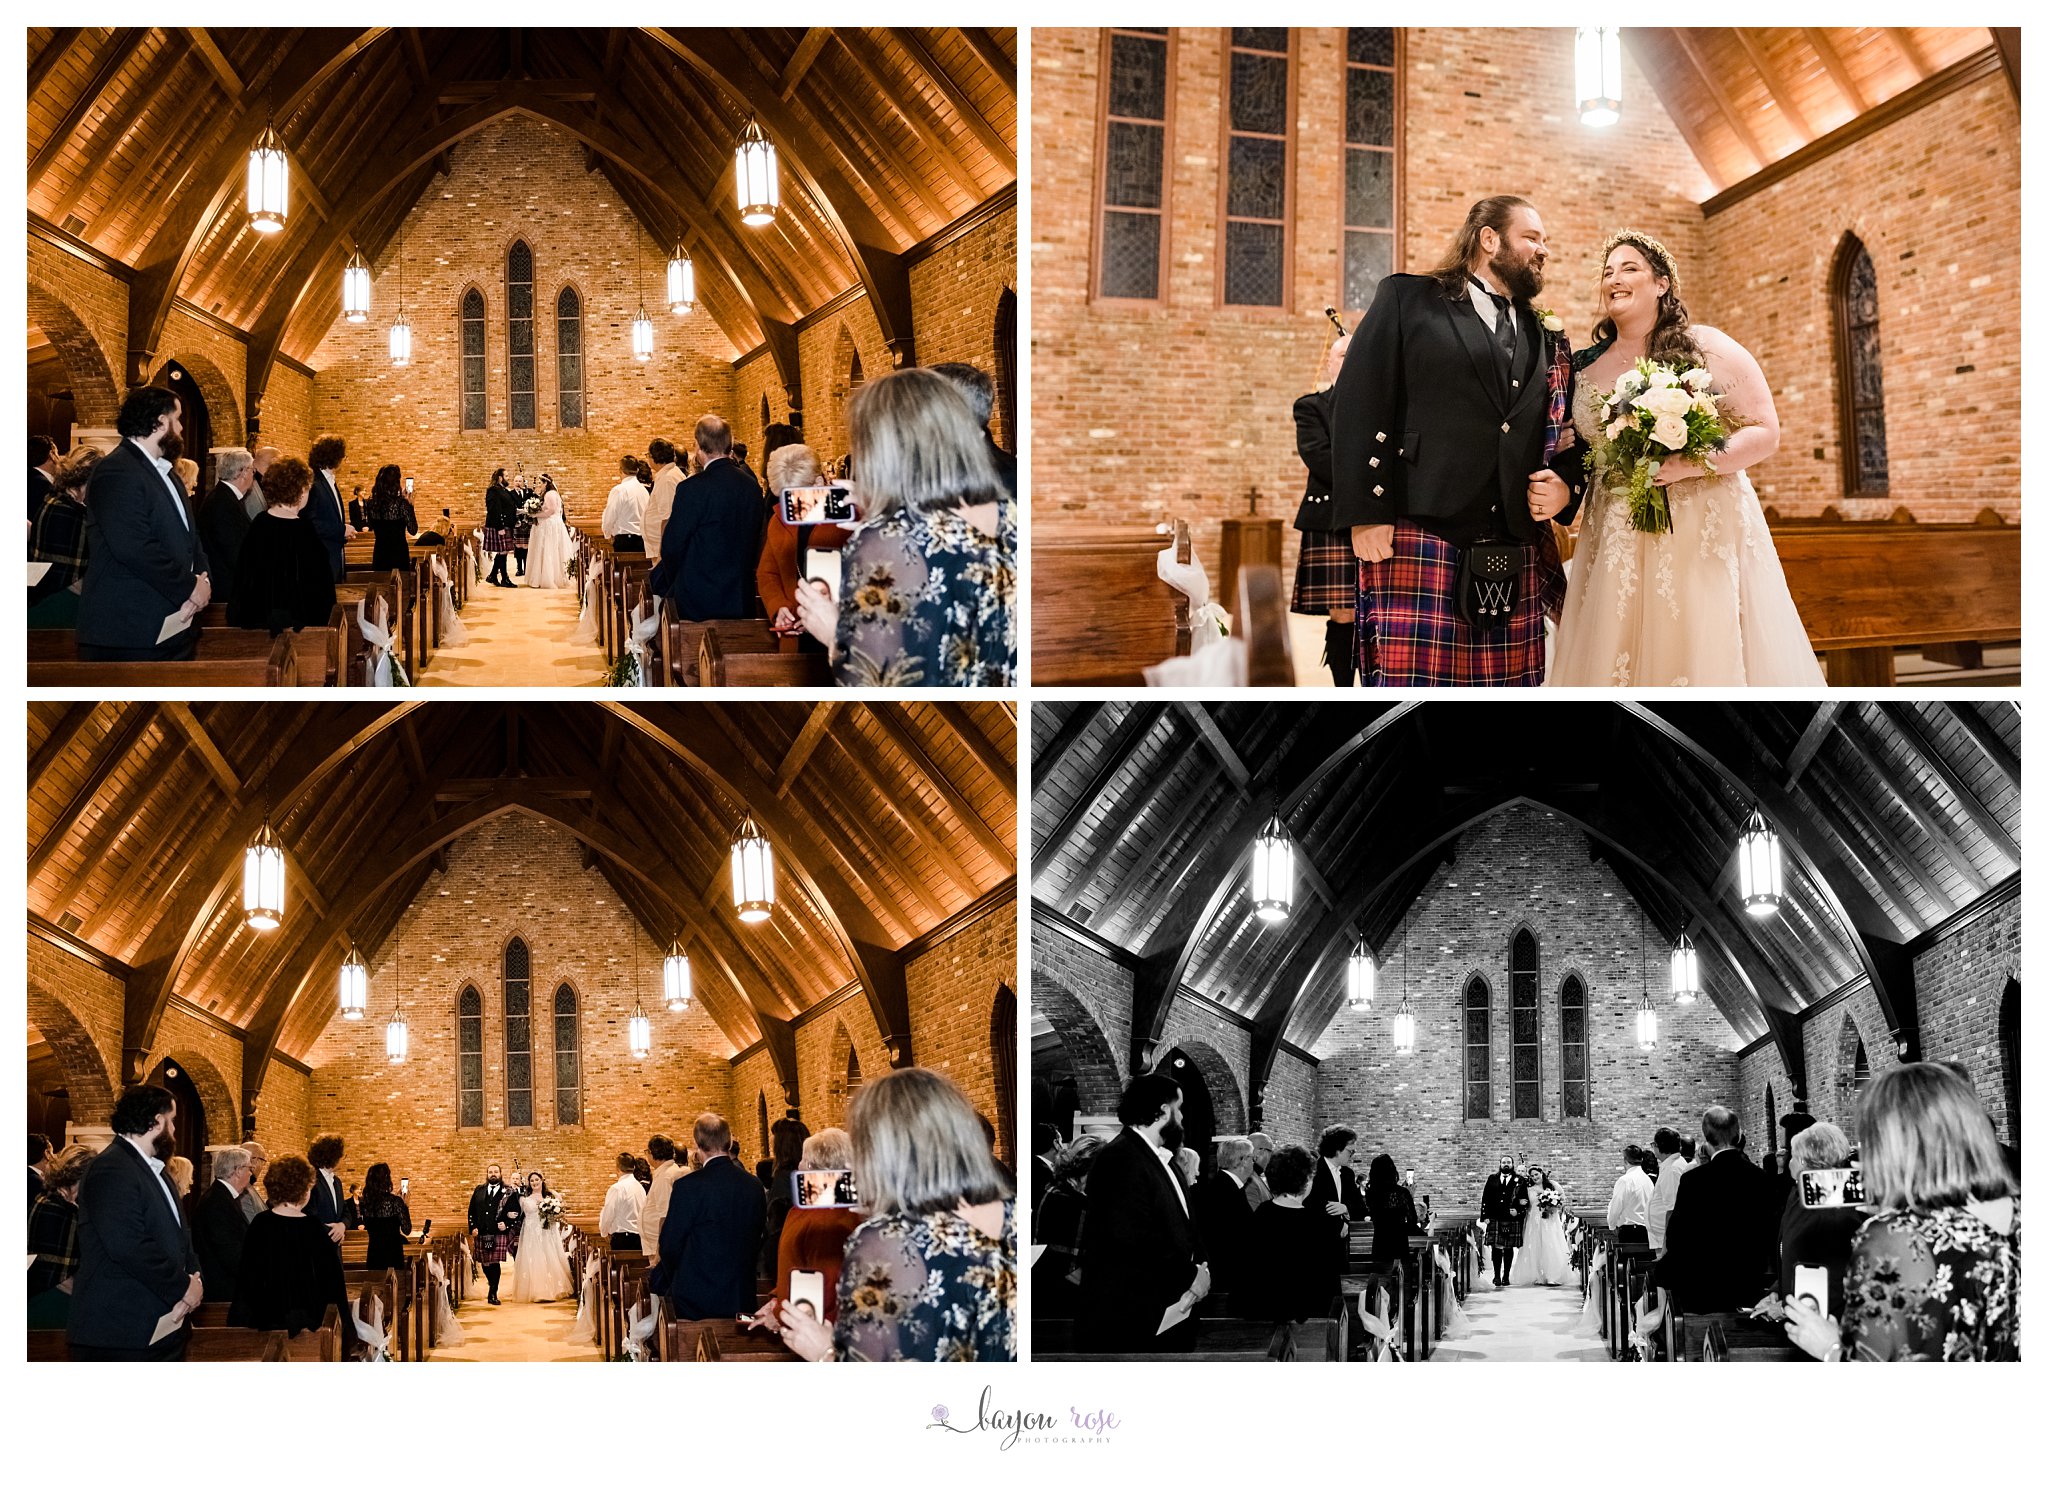 Scottish bagpipes piping couple down the aisle for wedding